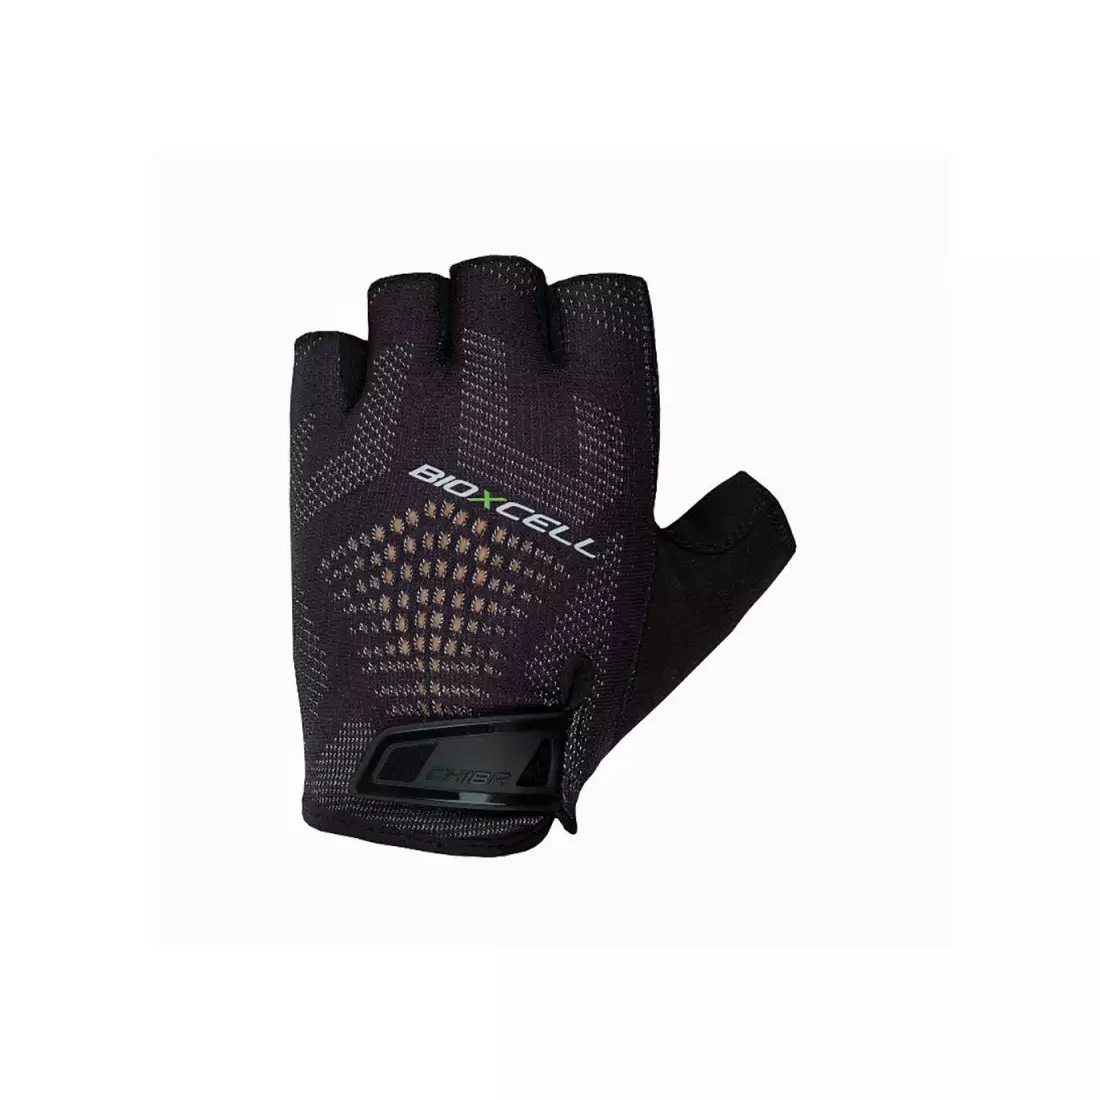 CHIBA BIOXCELL SUPER FLY cycling gloves black 3060318